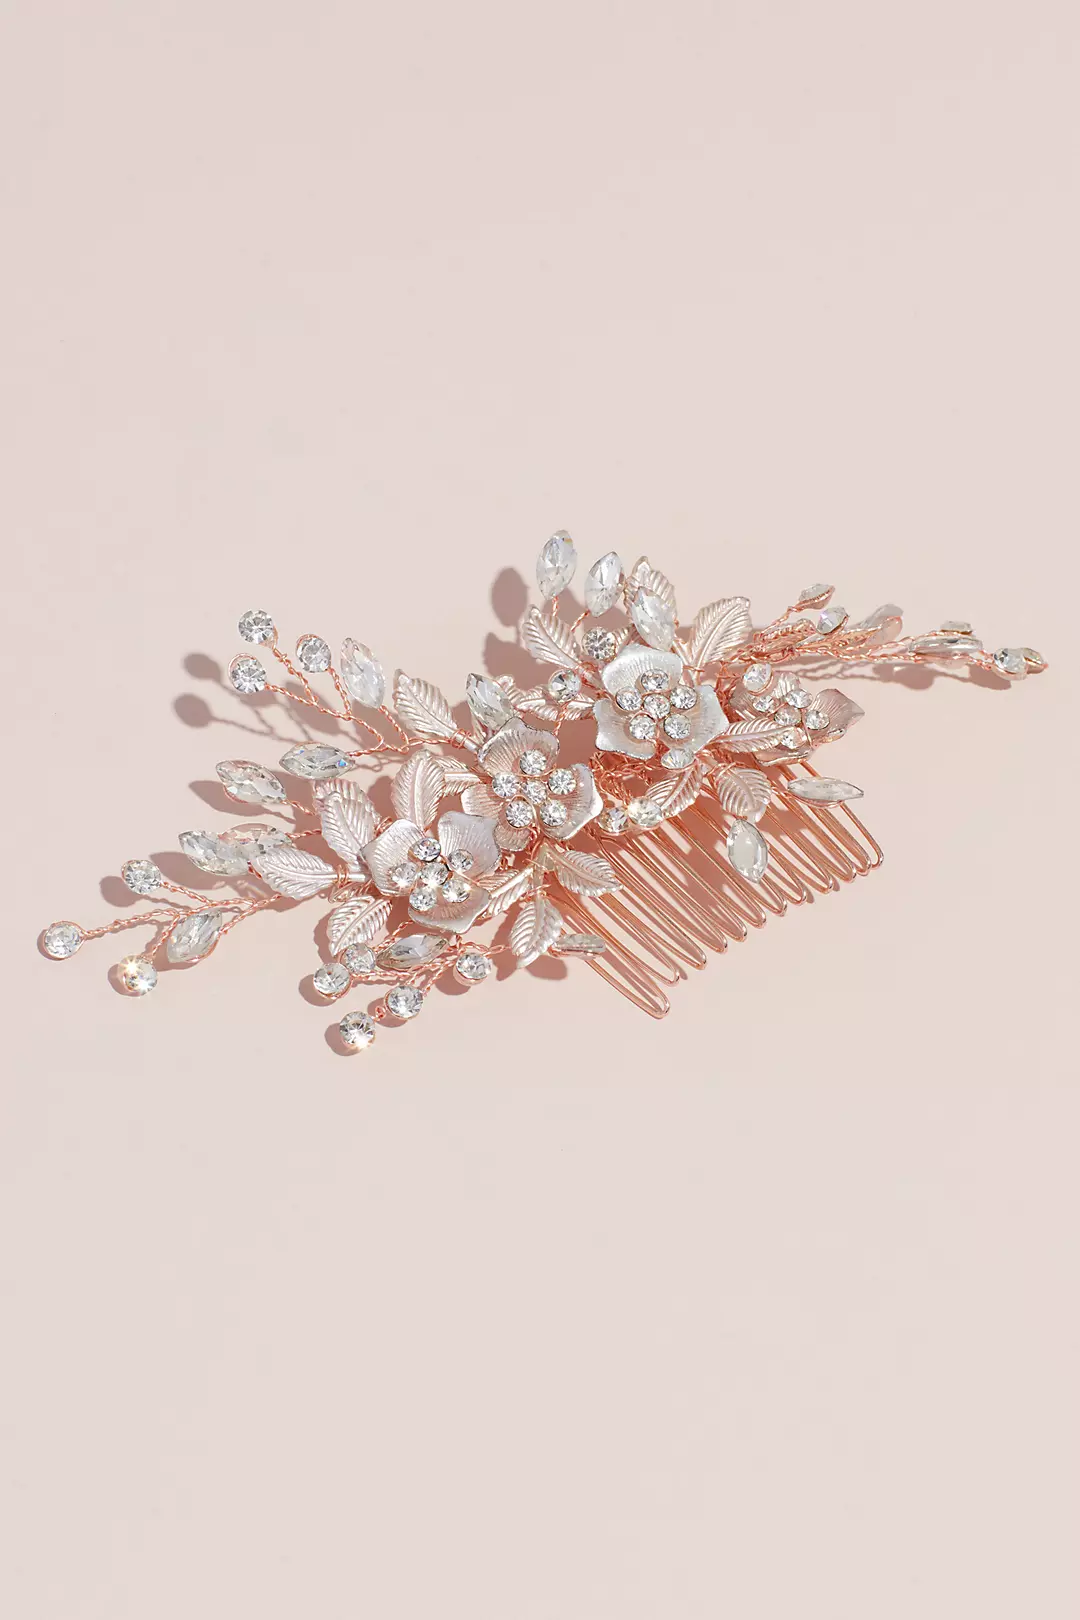 Blooming Crystal Branches Gilded Floral Hair Comb Image 2